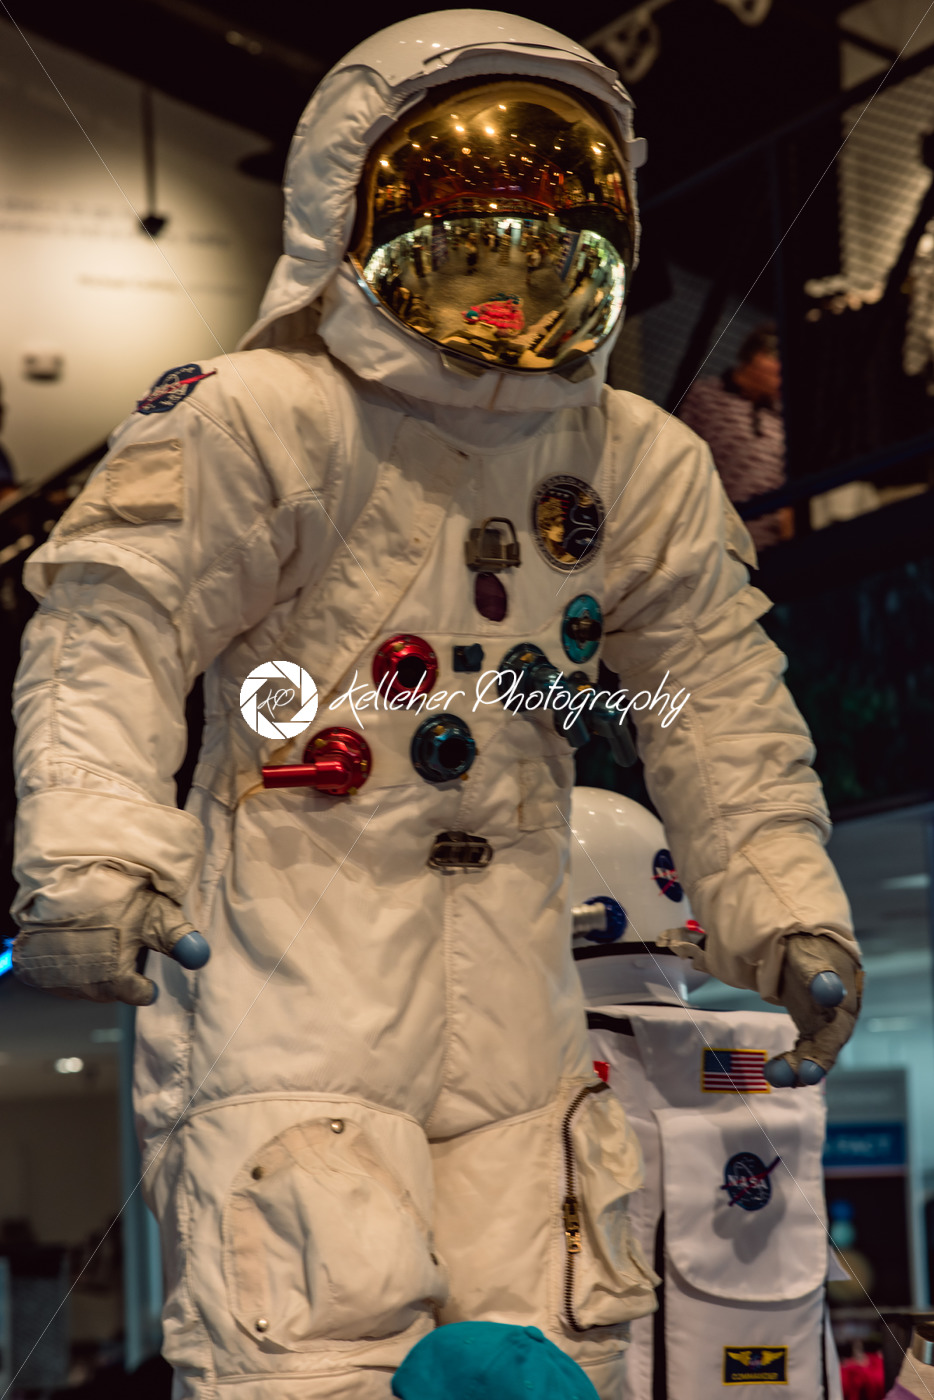 Cape Canaveral, Florida – August 13, 2018: Astronaut Suit at NASA Kennedy Space Center - Kelleher Photography Store